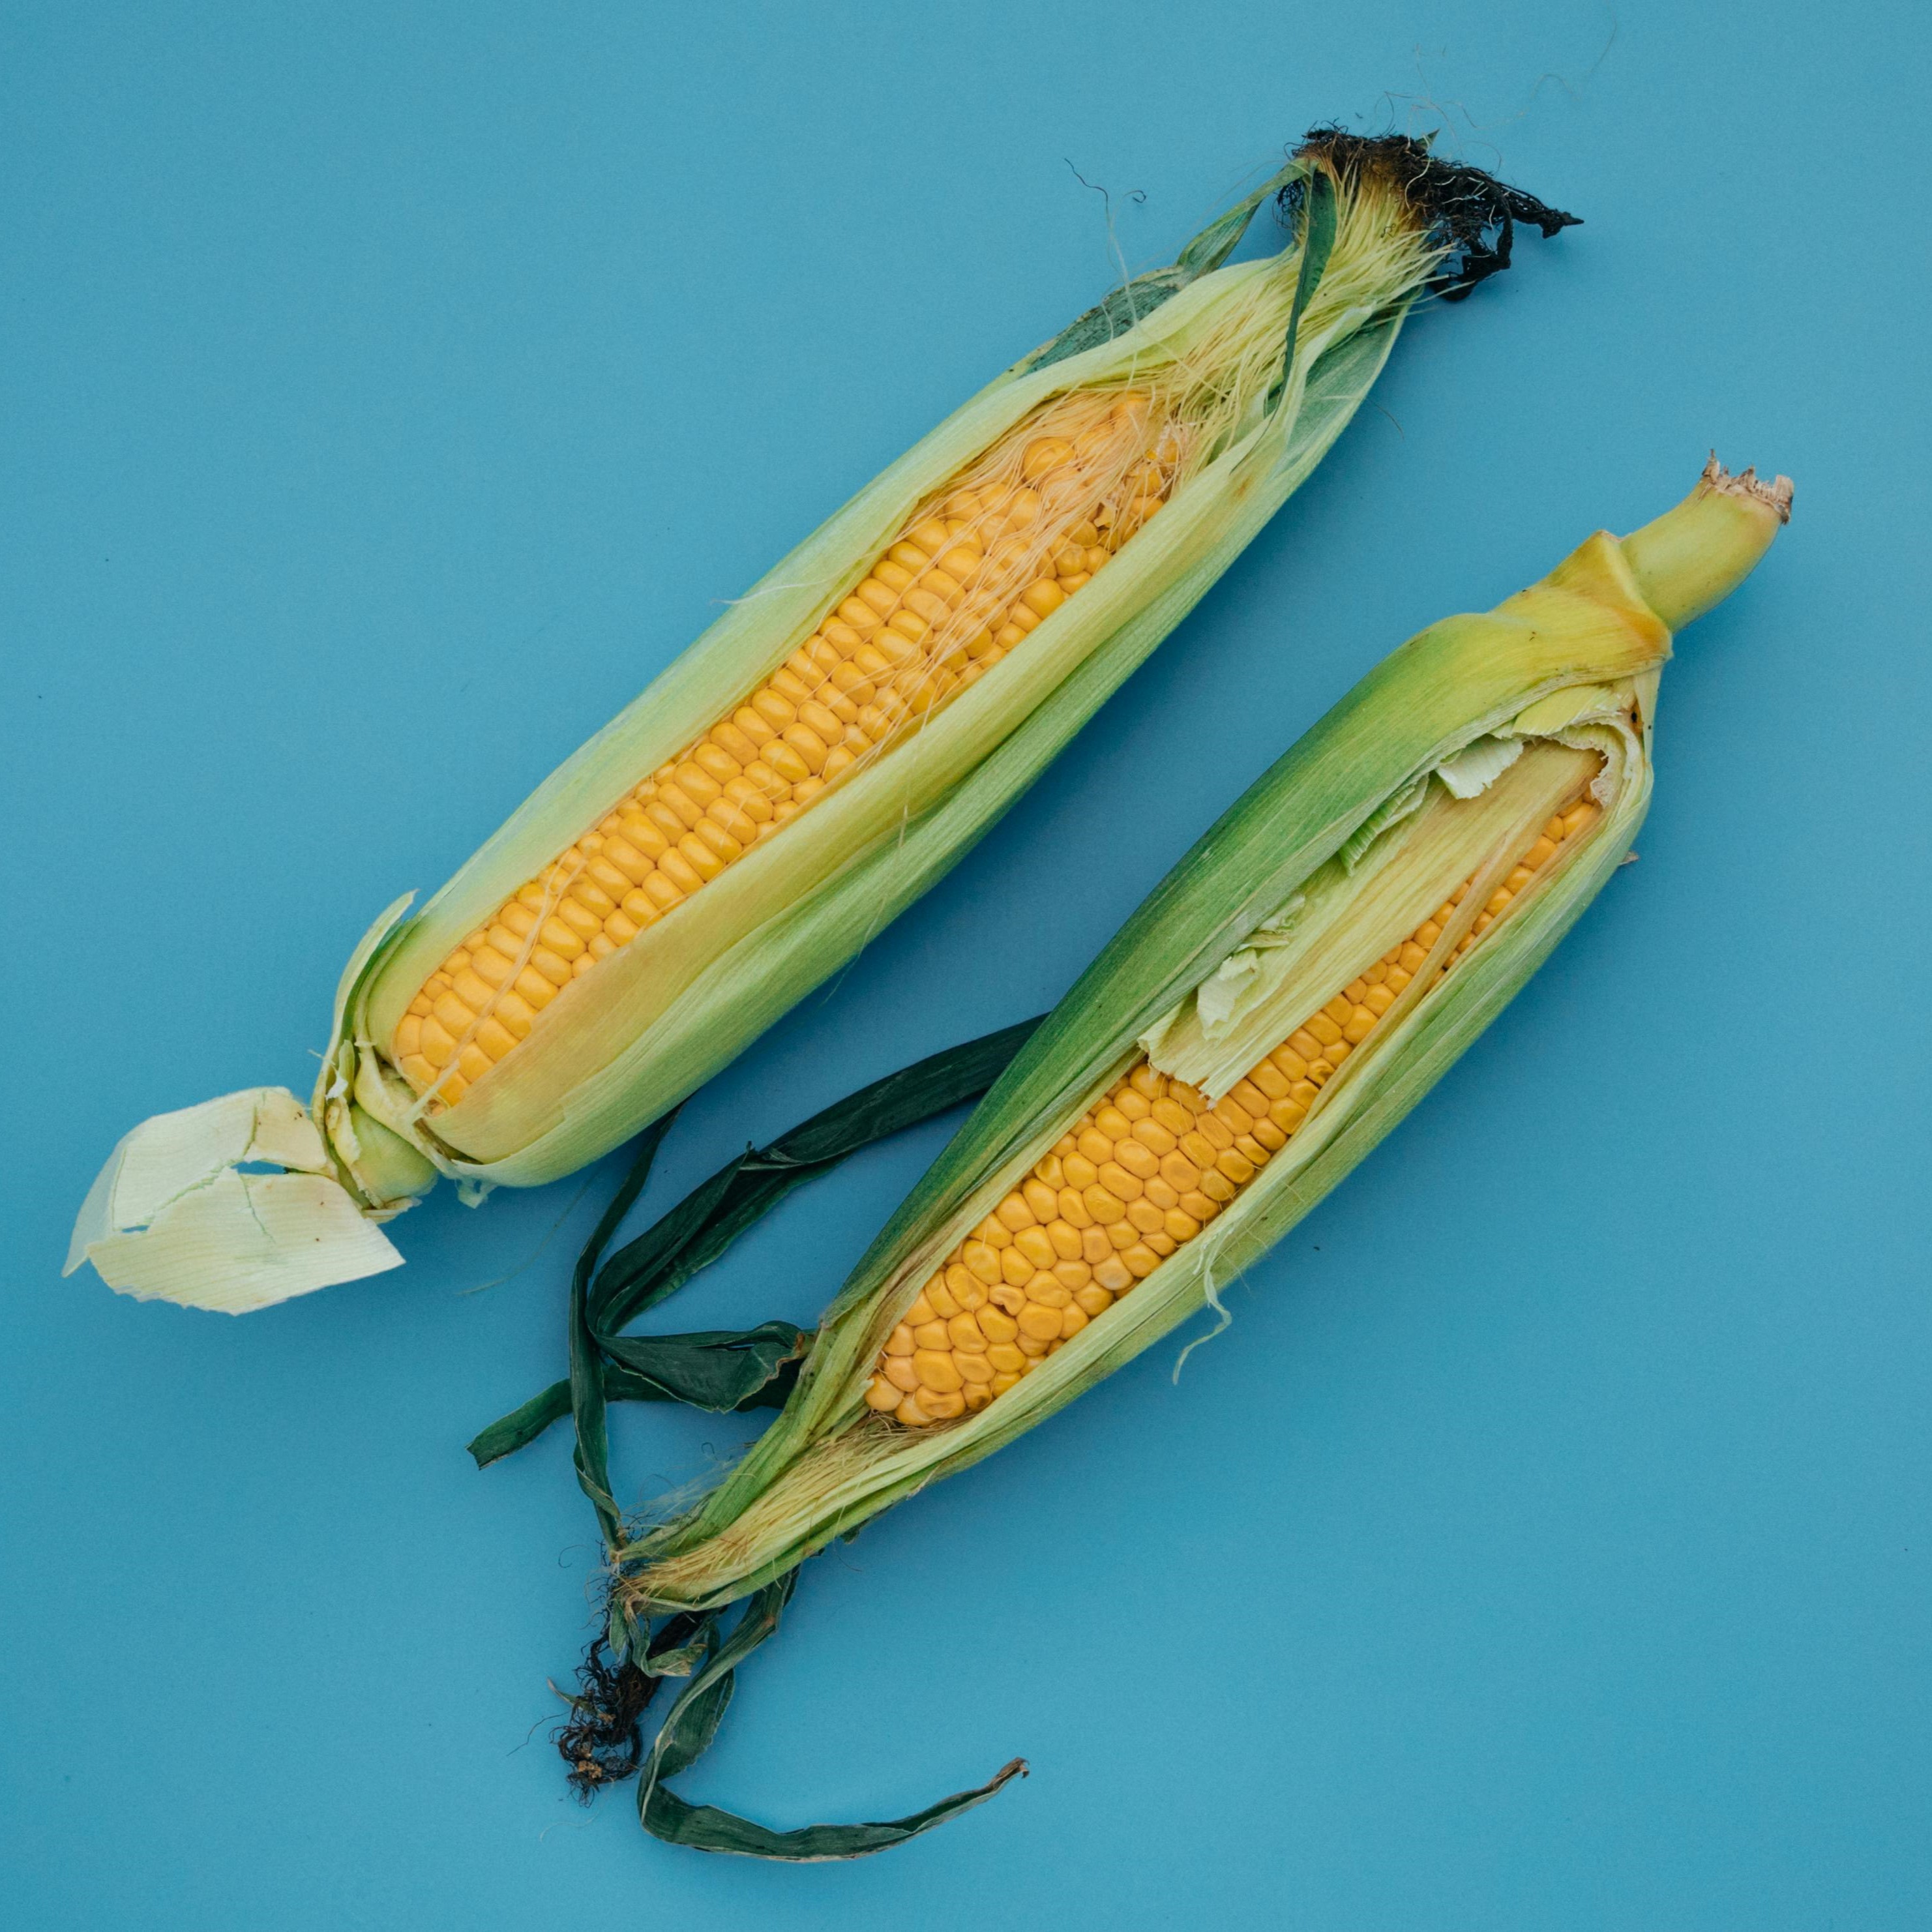 Sweetener in corn: Ginkgo partners with GreenLab to scale natural sugar substitute production